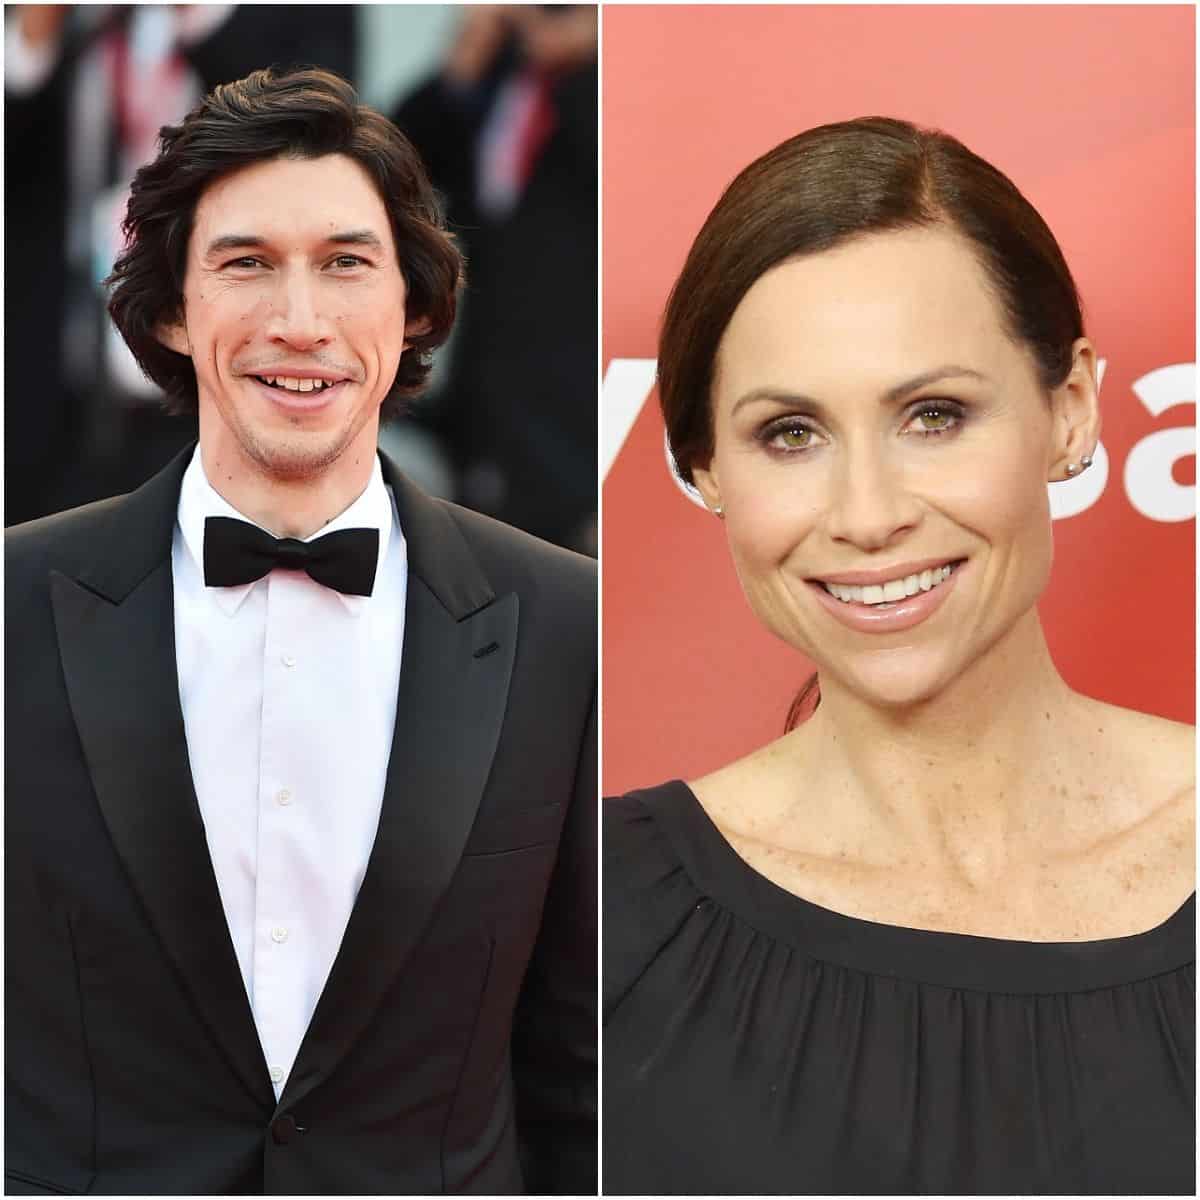 Is Adam Driver the brother of Minnie Driver